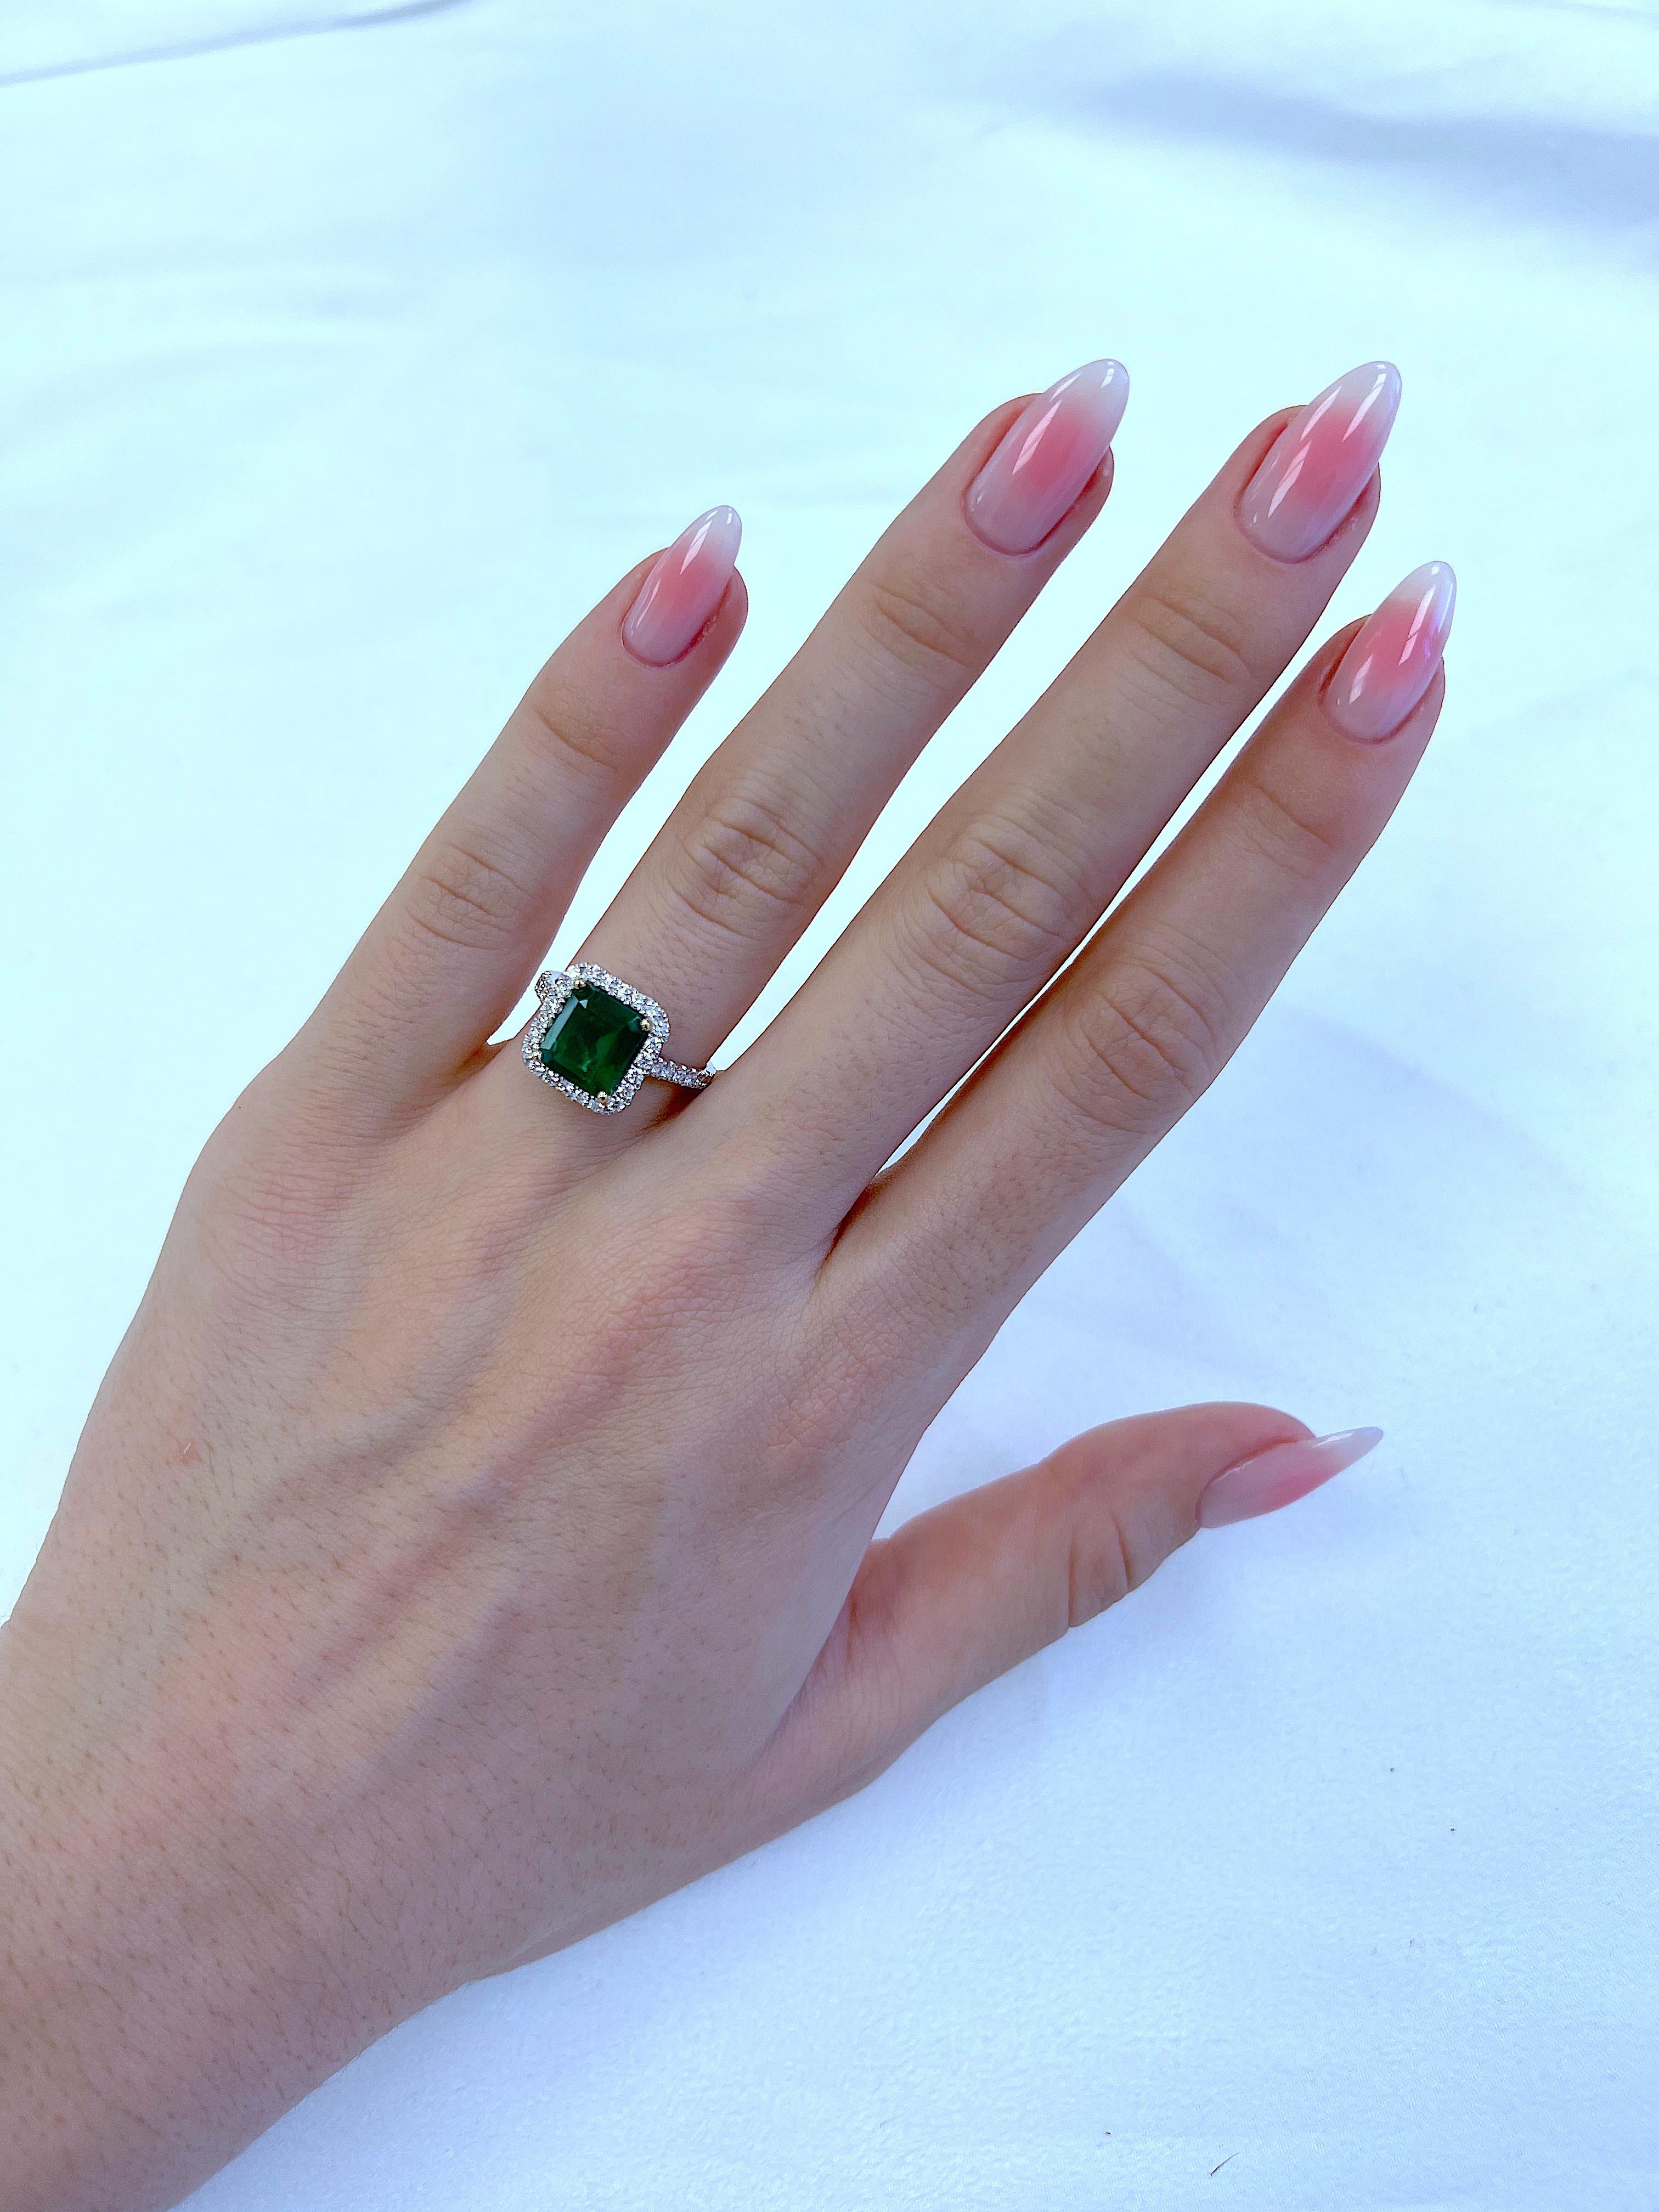 Classic emerald and diamond halo ring, GIA certified. 
3.10 carats total gemstone weight.
2.53 carat emerald cut emerald, F2, GIA certified. Complimented by 36 round brilliant diamonds, 0.57 carats, F/G color and VS clarity. 18k white and yellow